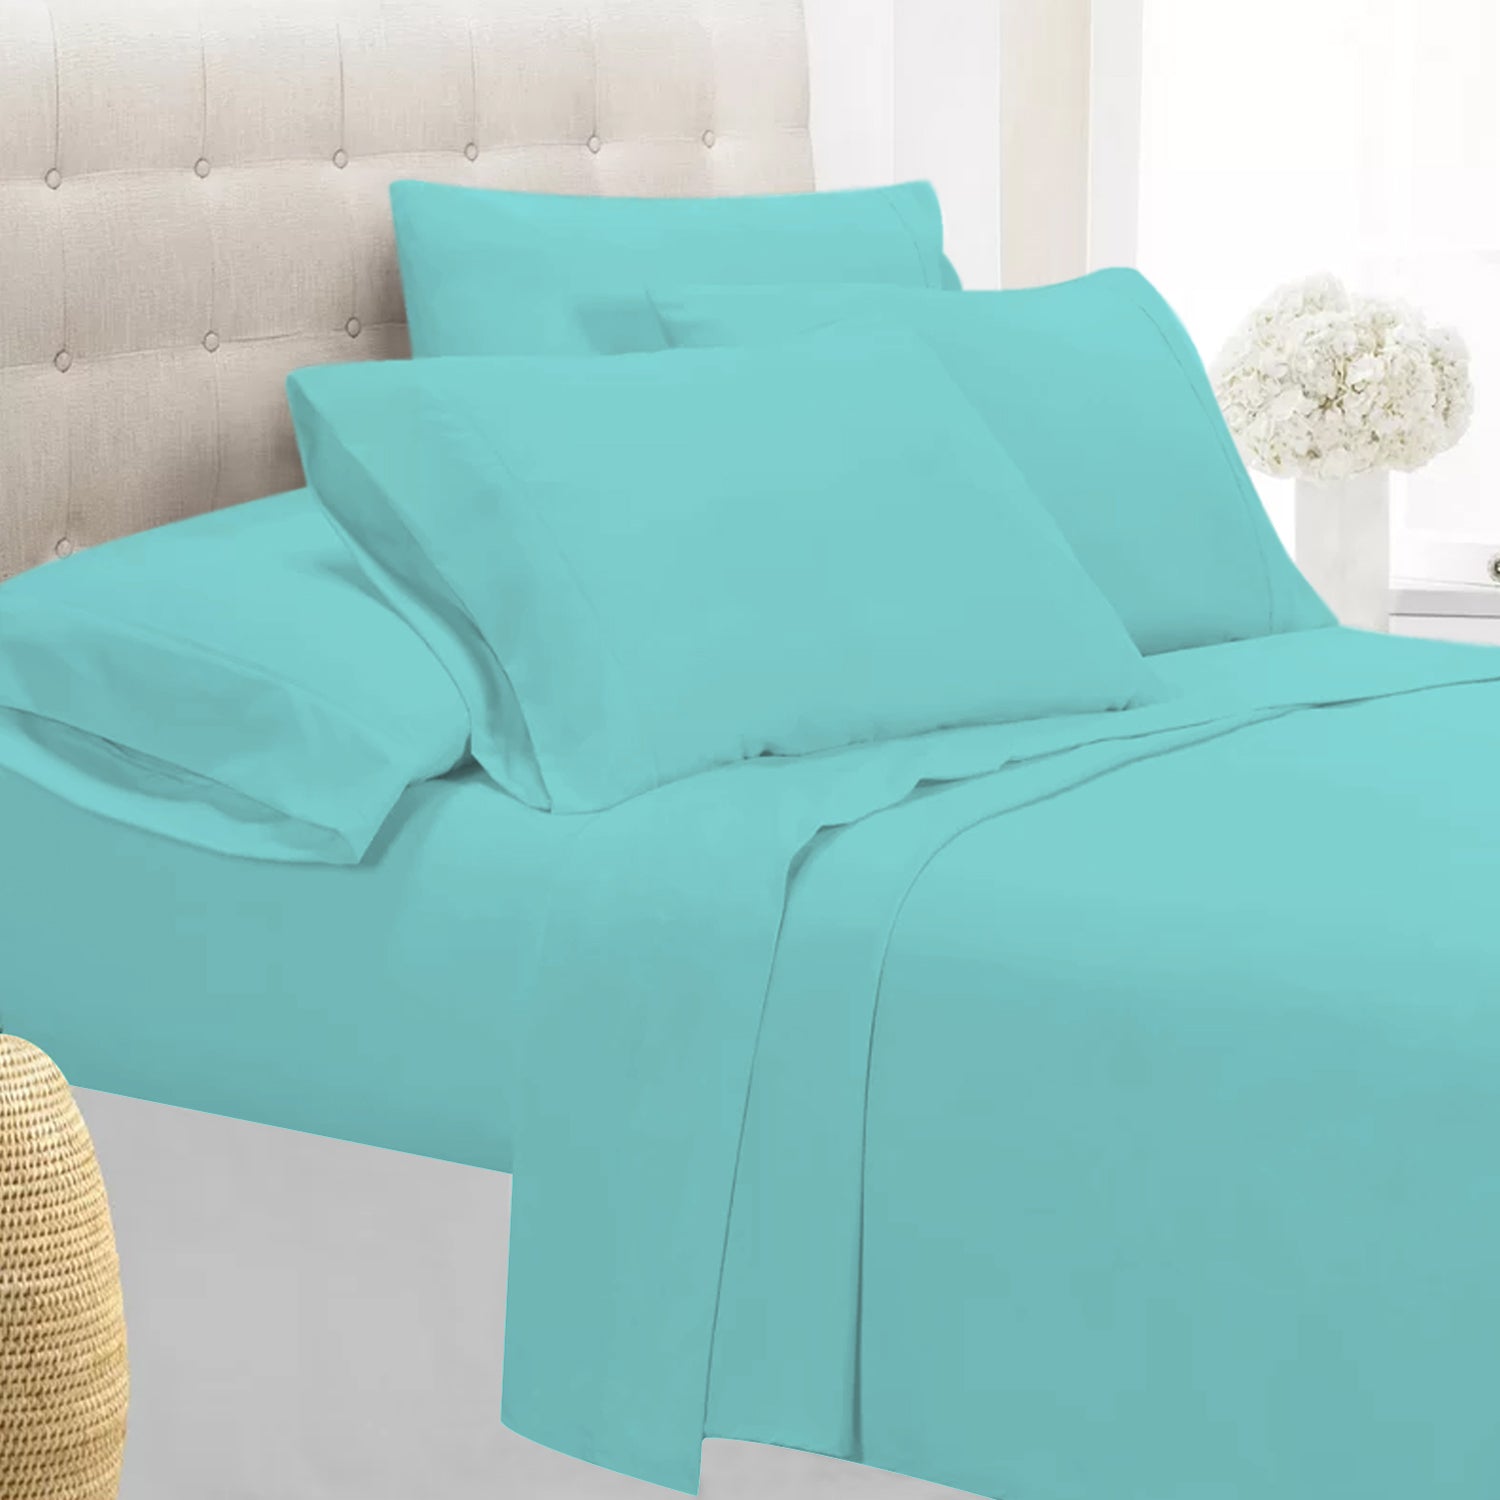 Luxury Ultra Soft 6-piece Bed Sheet Set by Home Collection - On